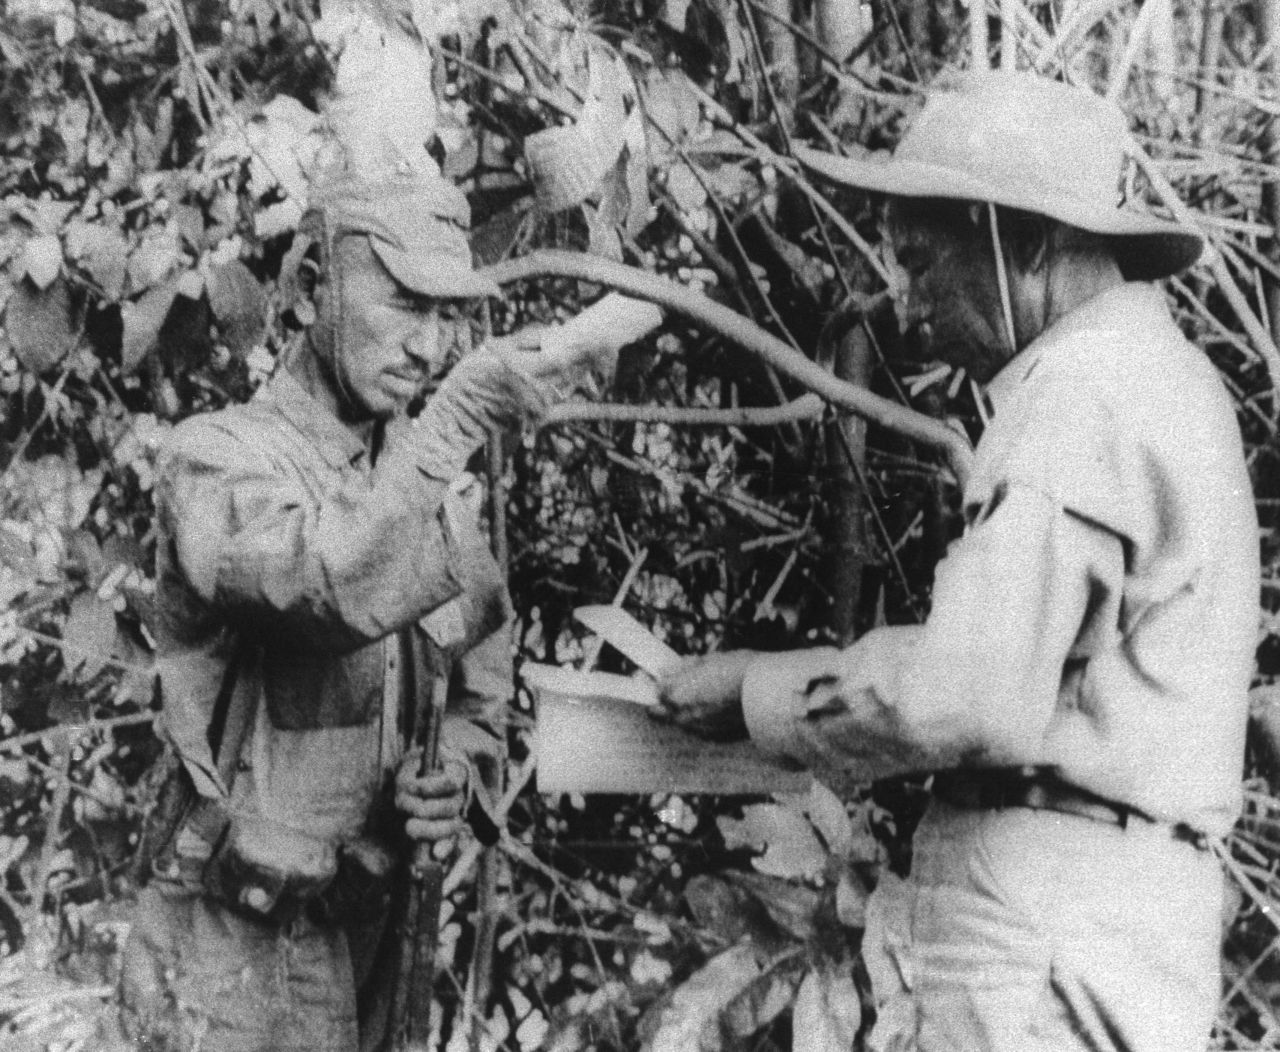 Onoda, left, accepts a pack of cigarettes from a member of a Japanese team sent in 1974 to persuade him the war had ended.